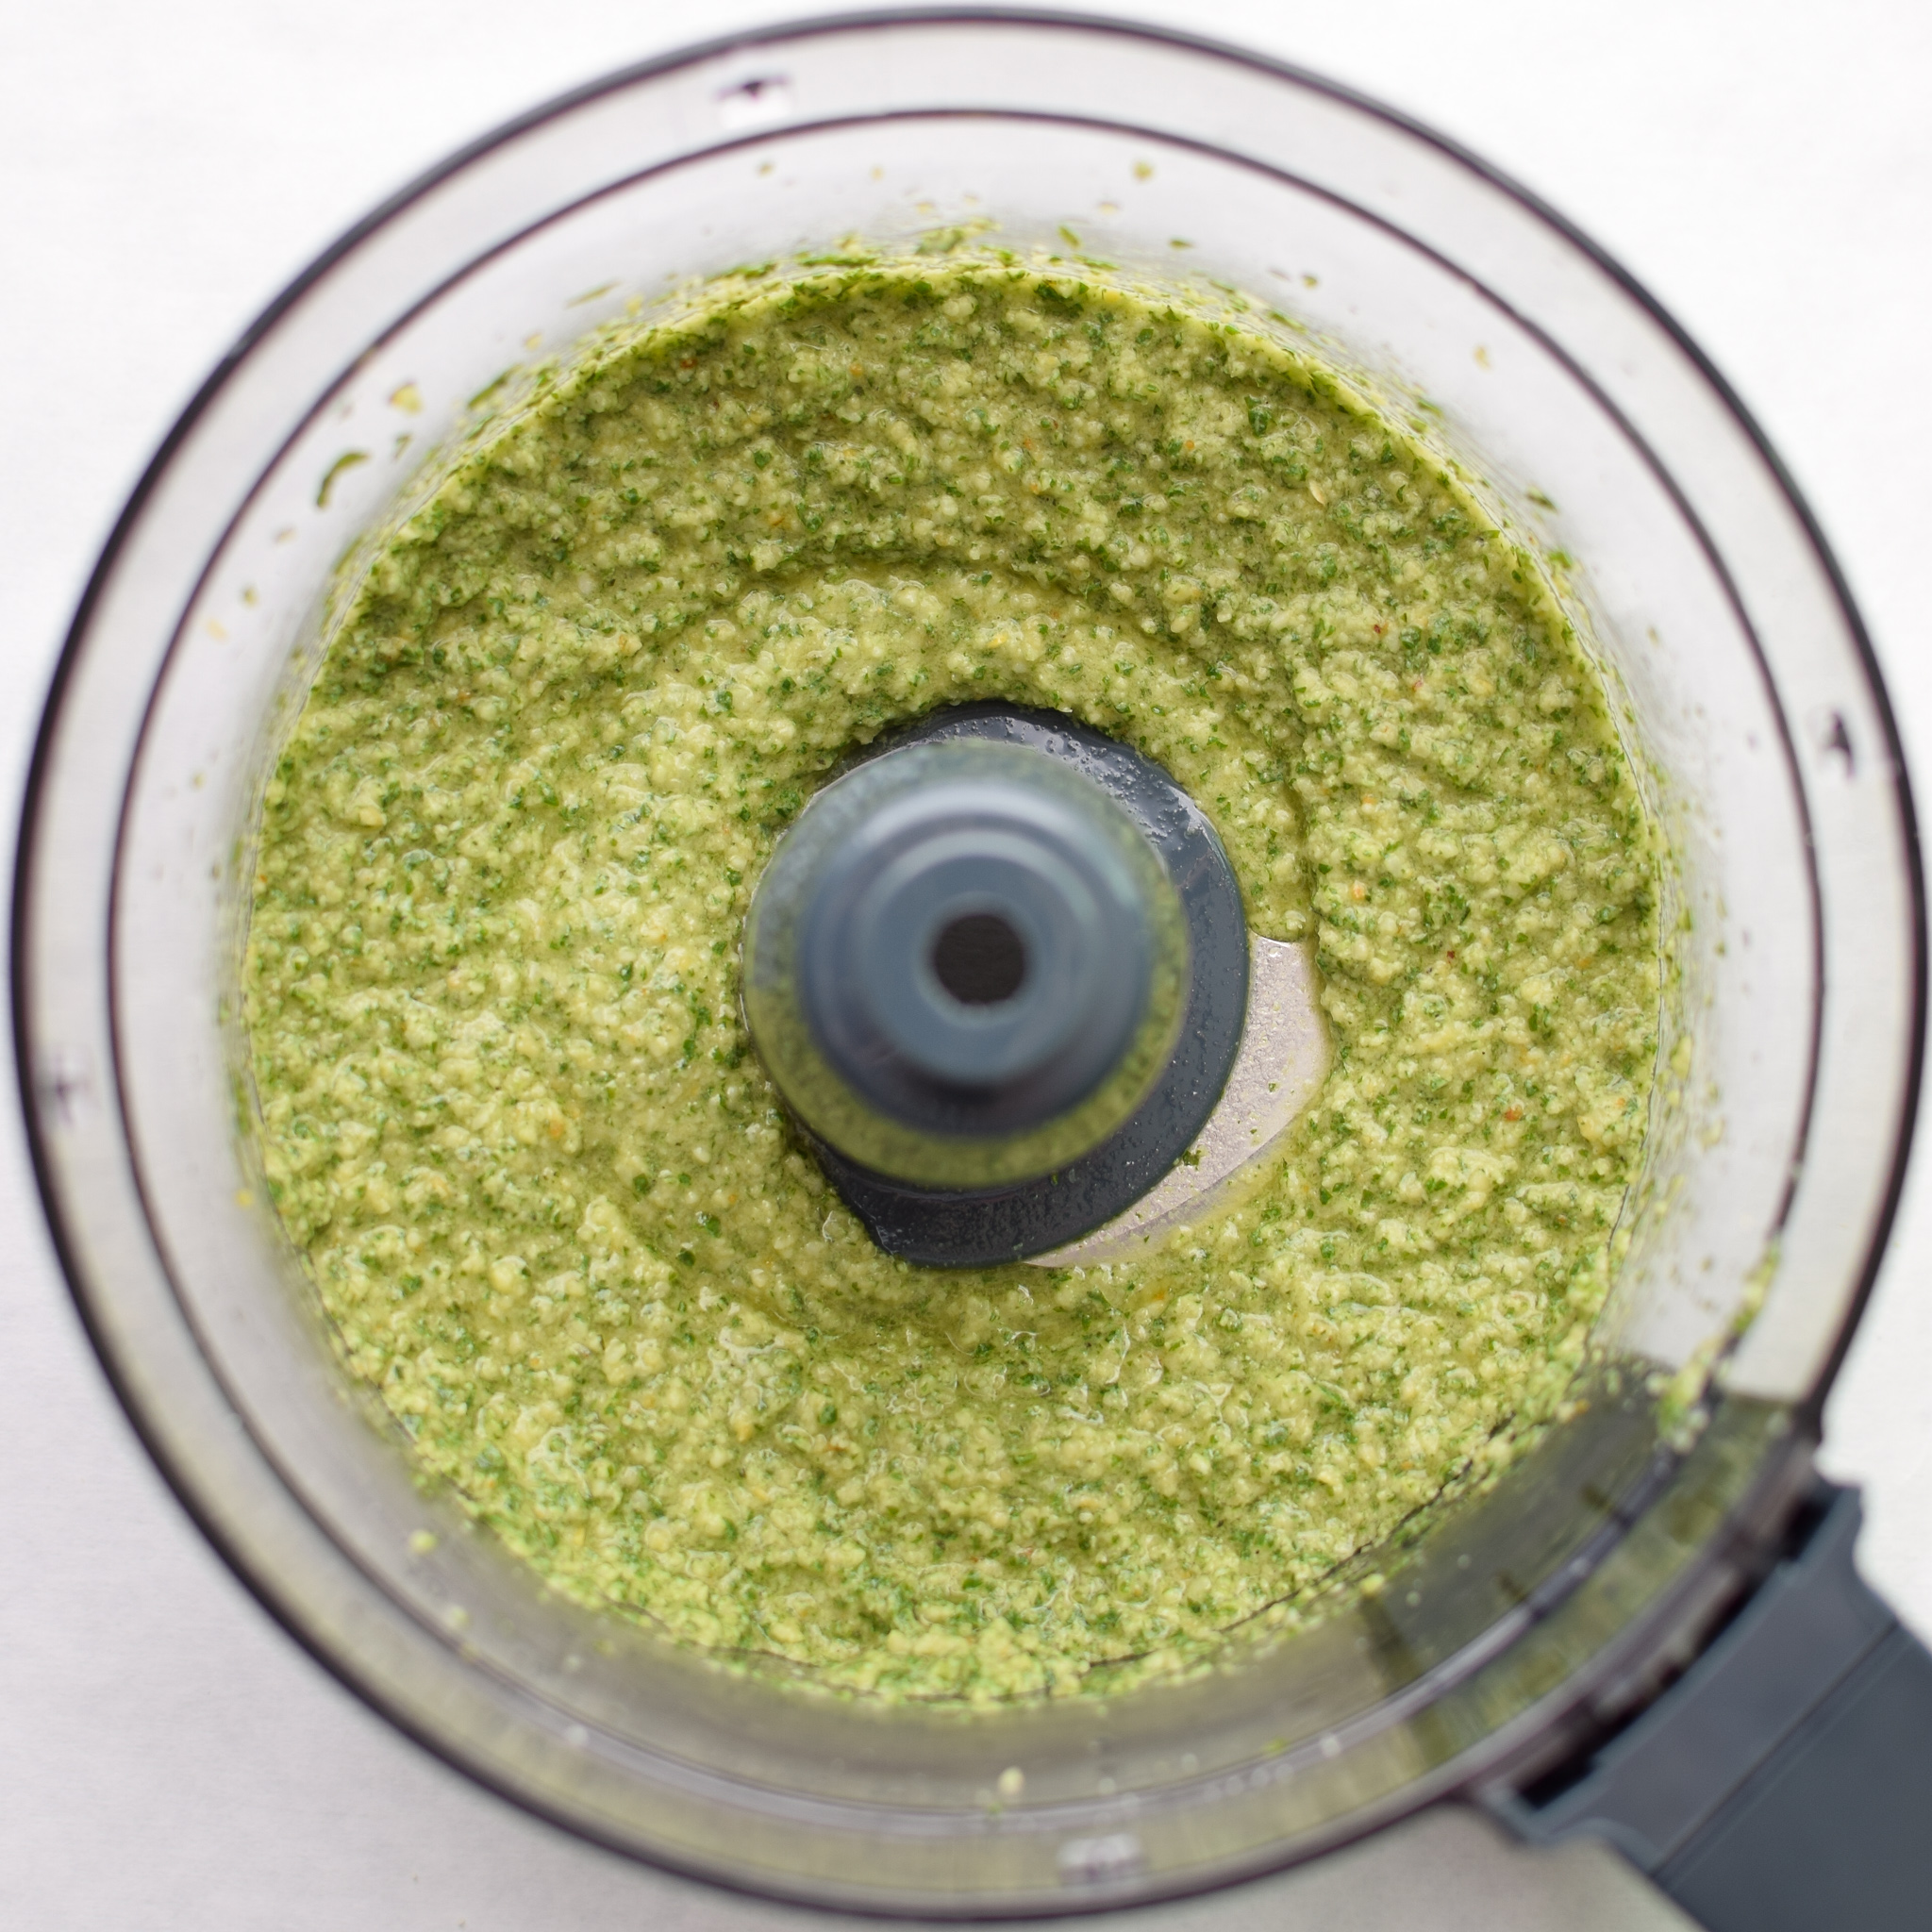 Store-Bought Vs. Homemade Pesto: Which is Cheaper?